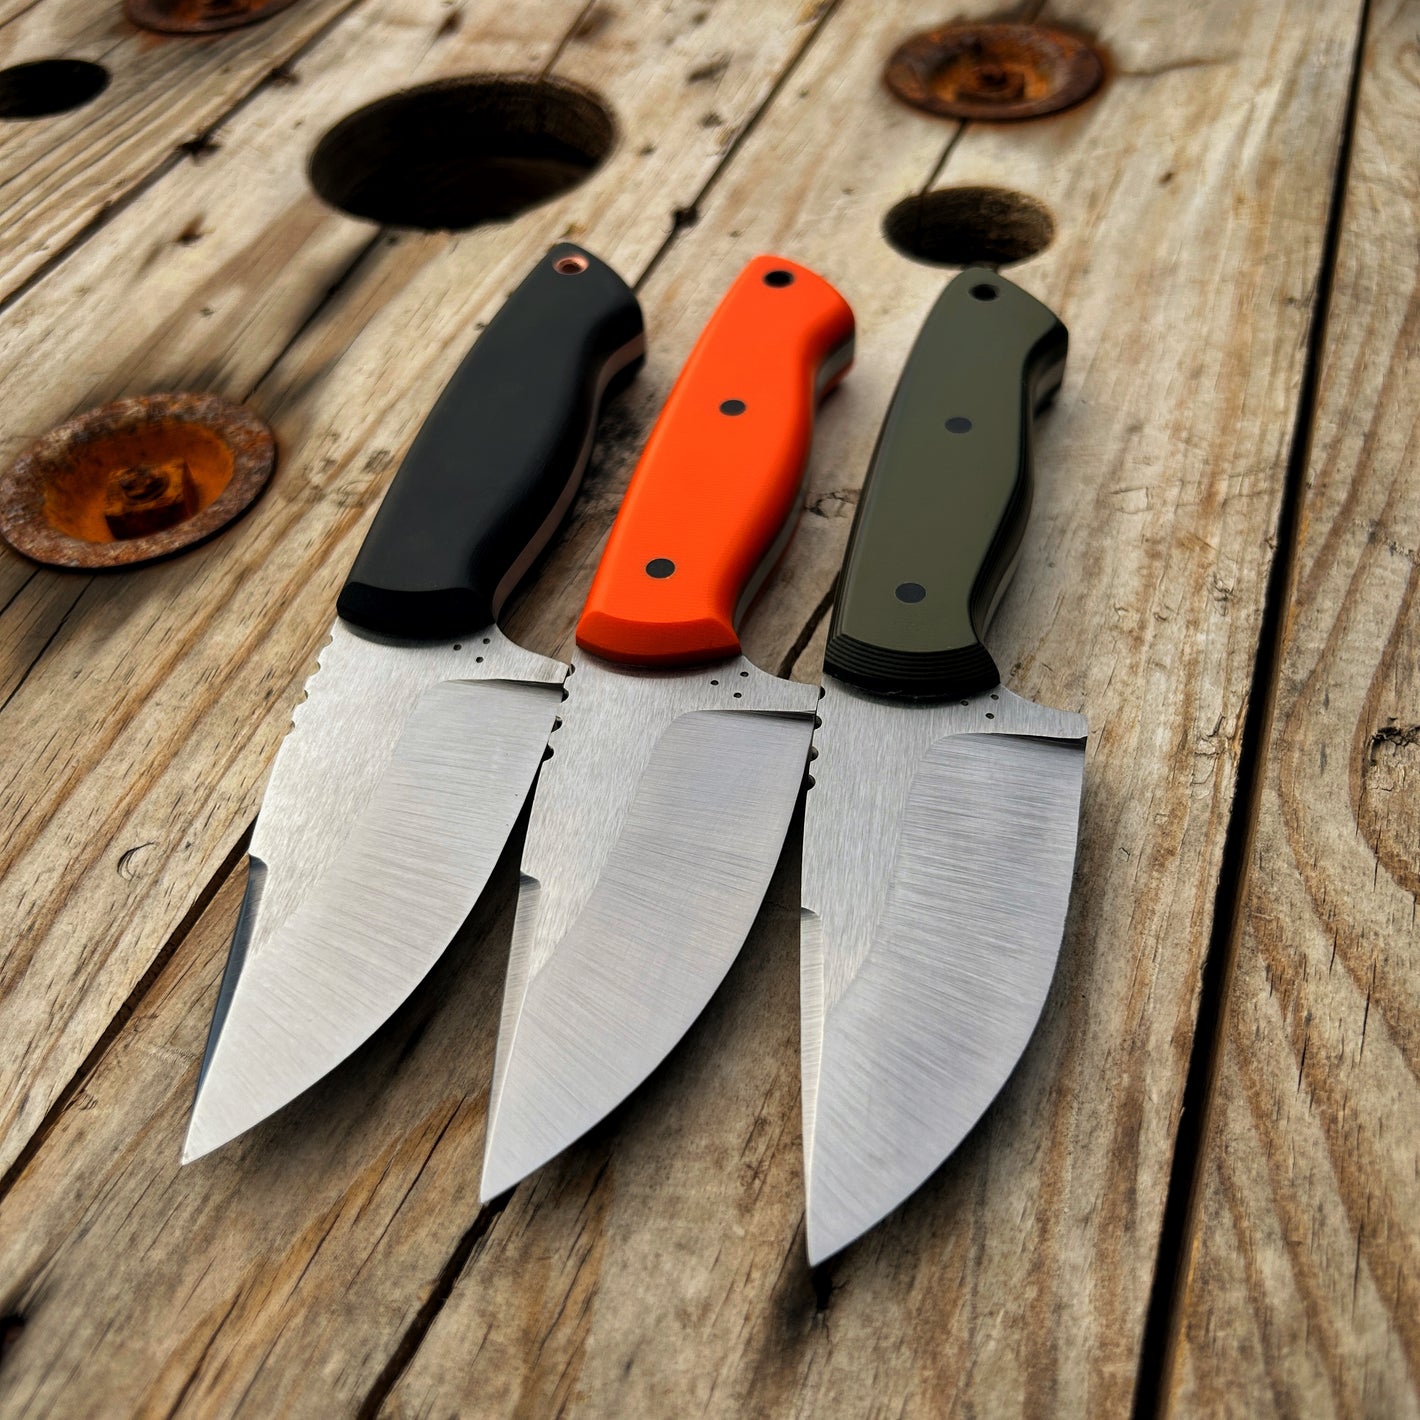 Three of the Colorado Hunter knives with the blade facing the camera and handles away. There is a black, orange, & OD green/black handled version pictured. The blades exhibit three dots in a triangle (makers mark) just behind the plunge line. 